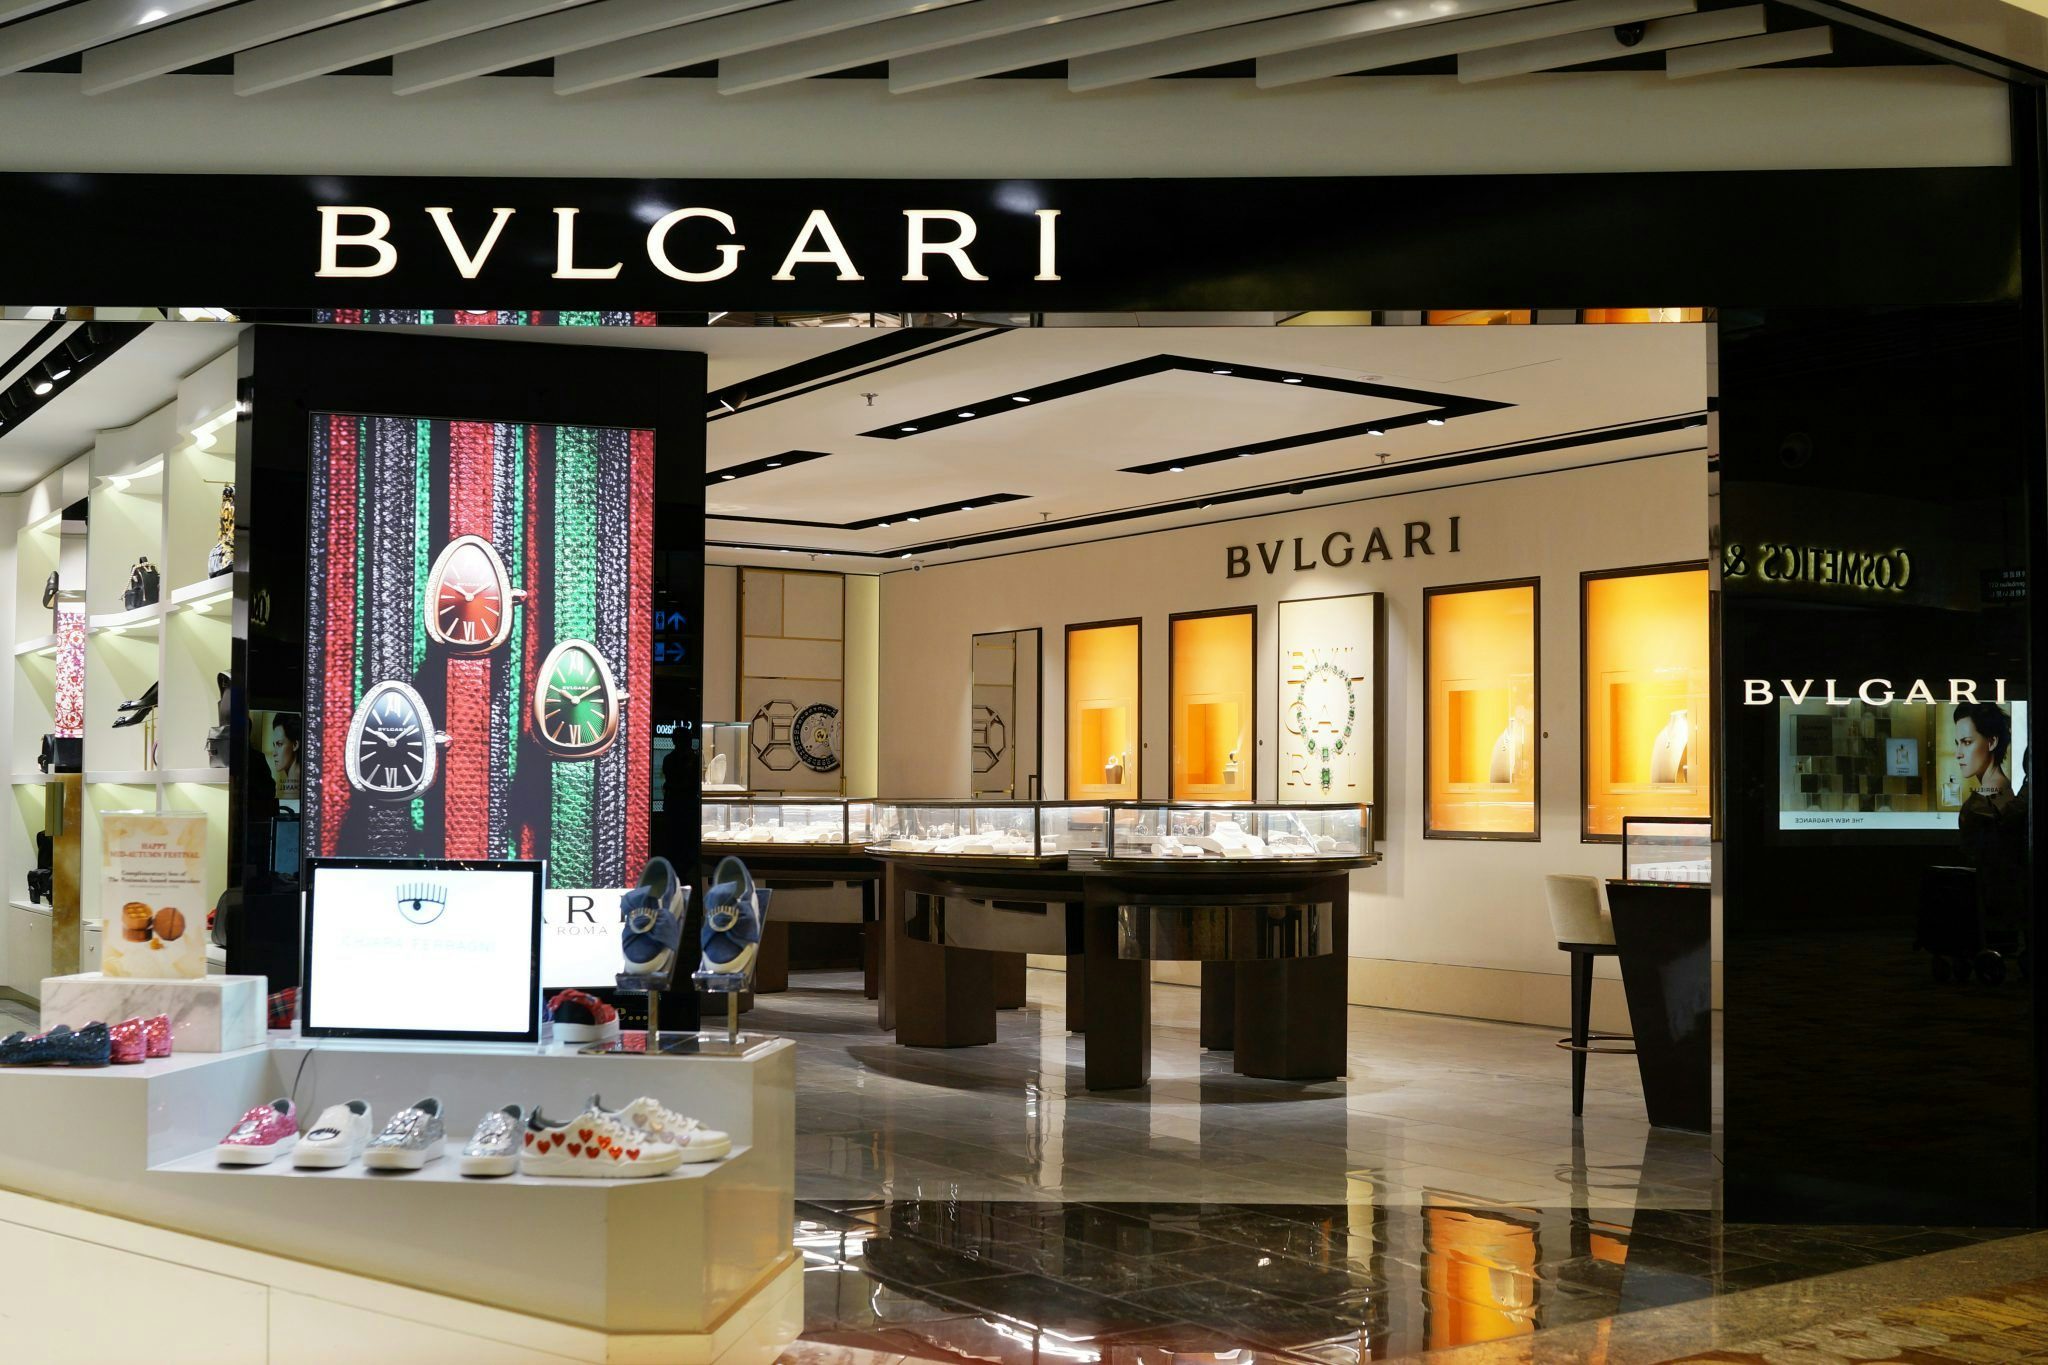 Bvlgari to Open at Sydney in Another Australian Airport First